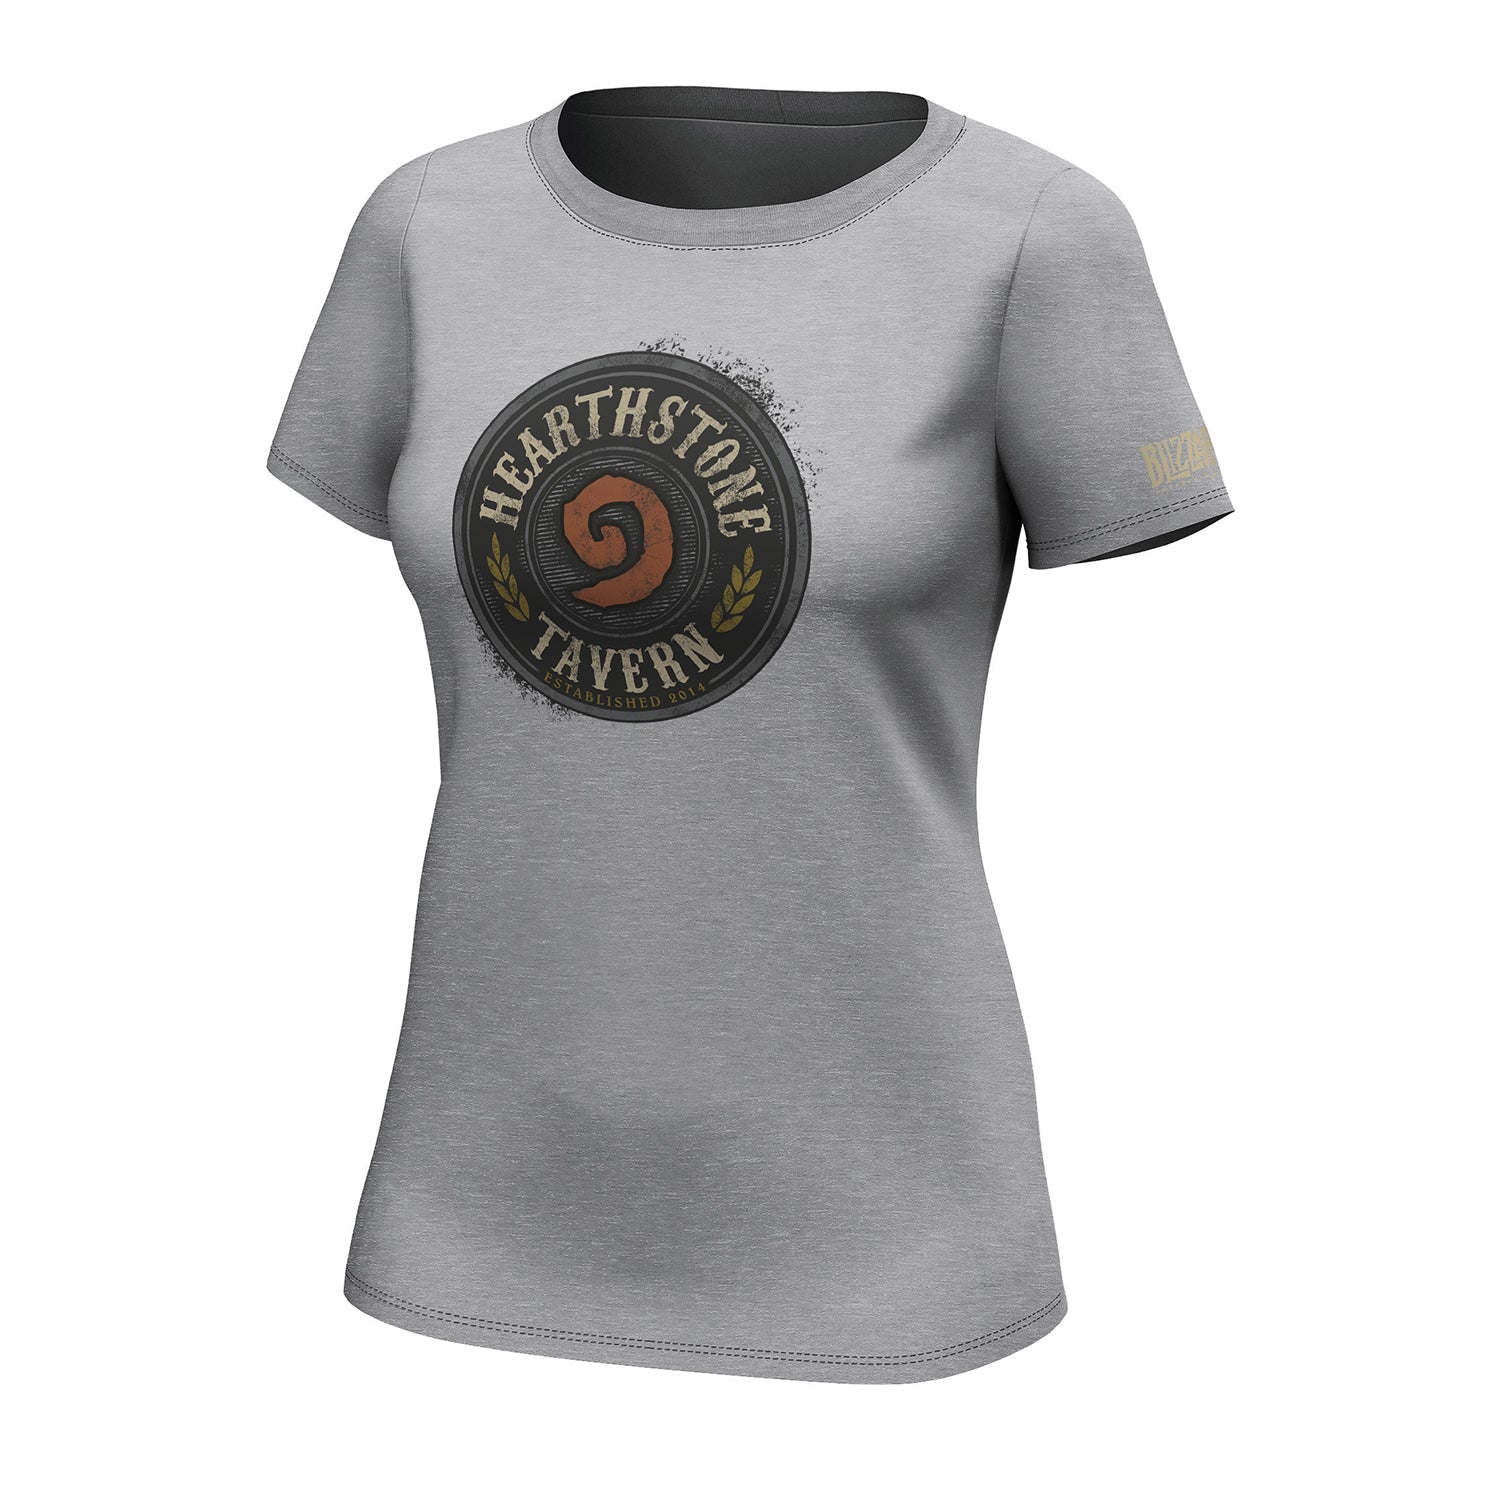 Hearthstone Women's Grey T-Shirt - Front Left View